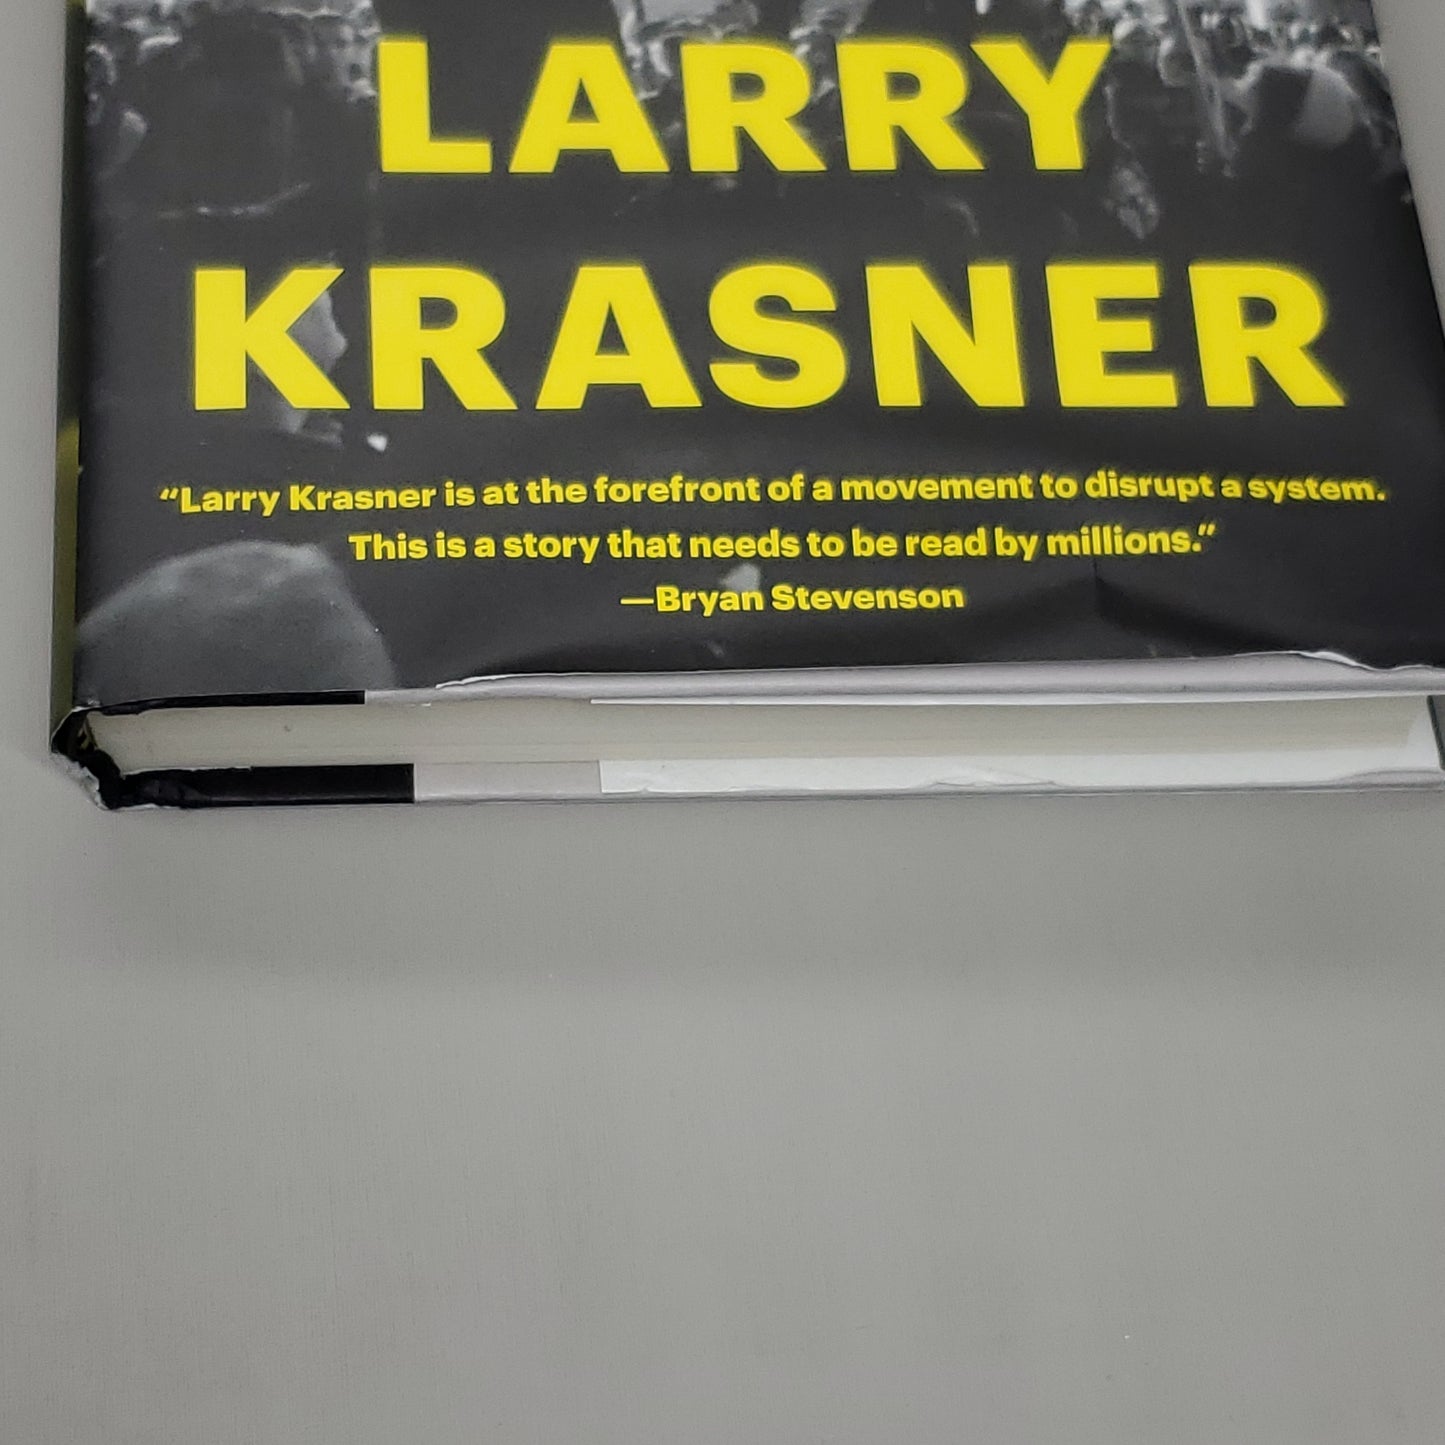 FOR THE PEOPLE A Story of Justice & Power by Larry Krasner Book Hardback (New Other)